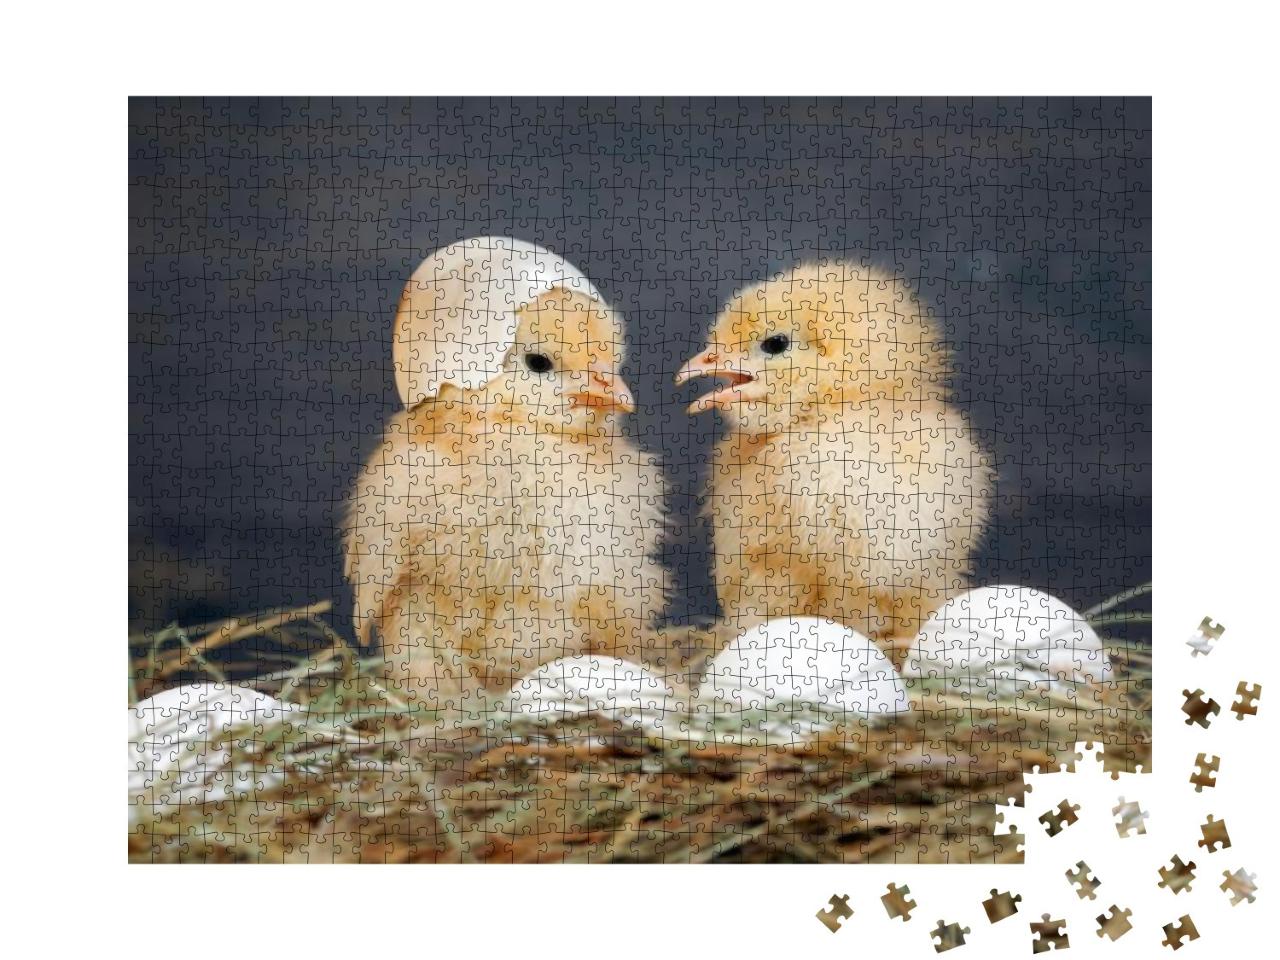 Newborn Chicks. Orange Chicks Communicate with Each Other... Jigsaw Puzzle with 1000 pieces